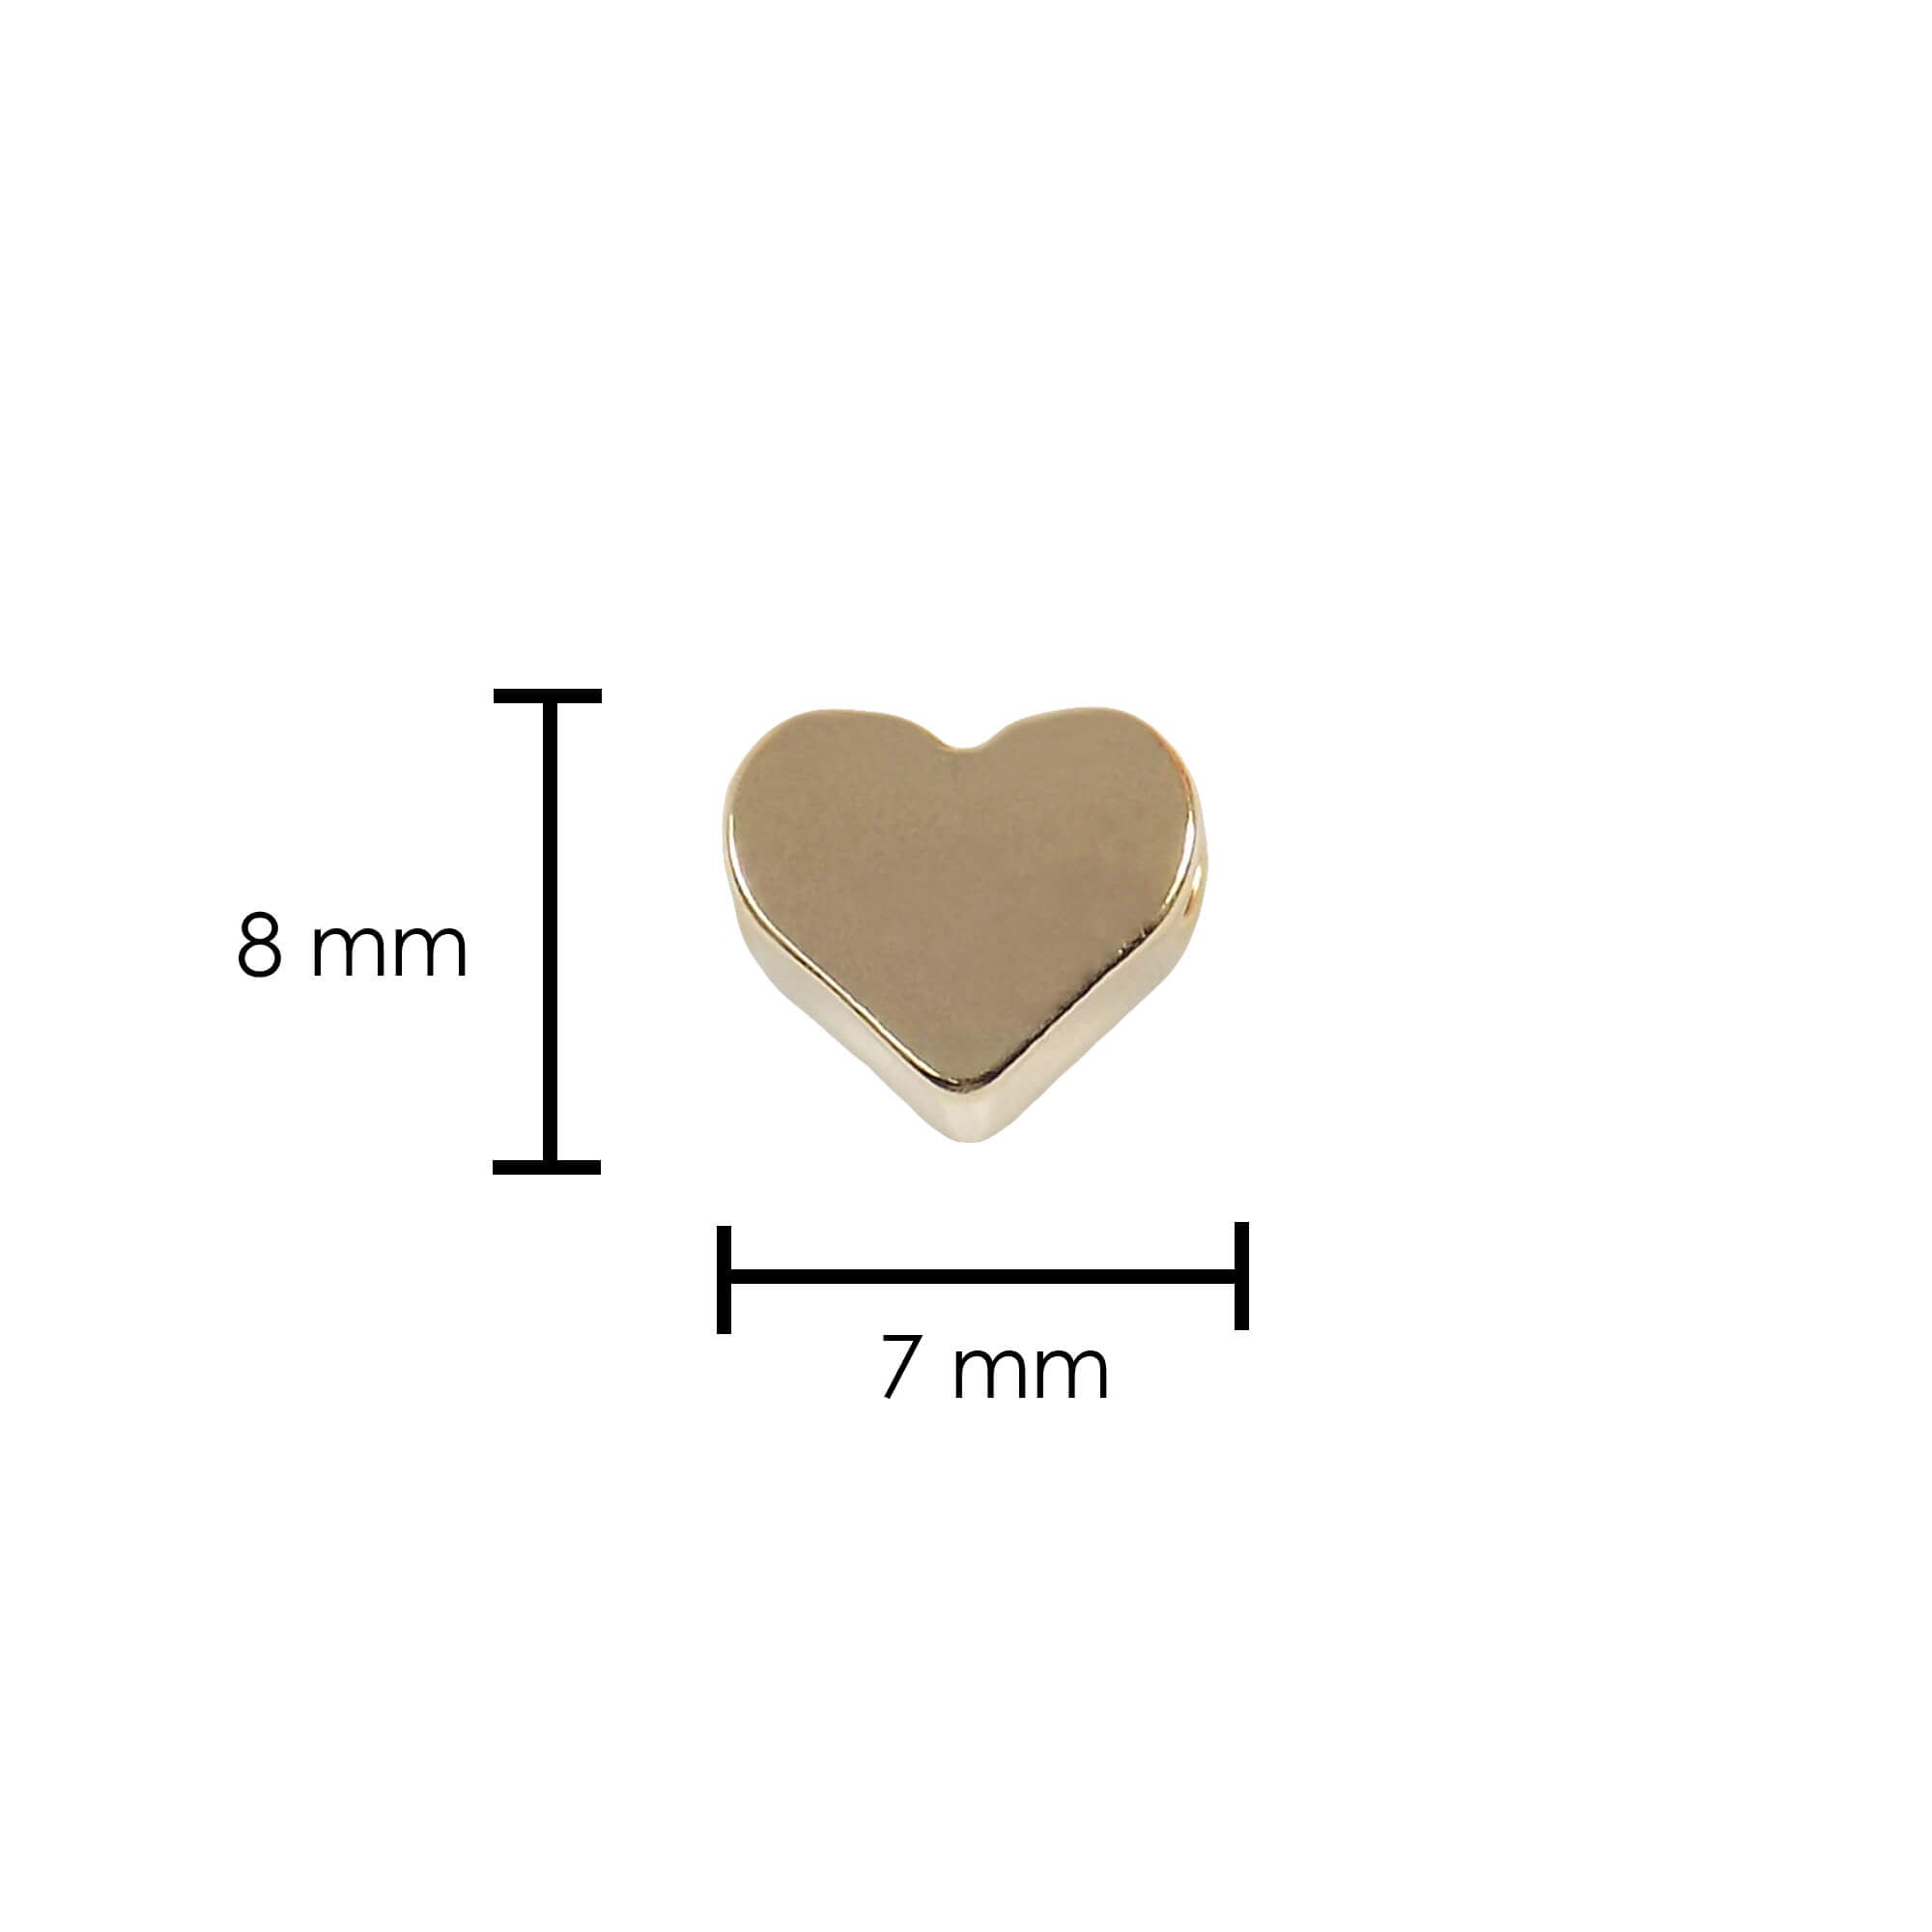 Heart Shaped Charm, Little Spacer Gold Plated Size 8x7mm (06 Pieces) Heart Slide Charm